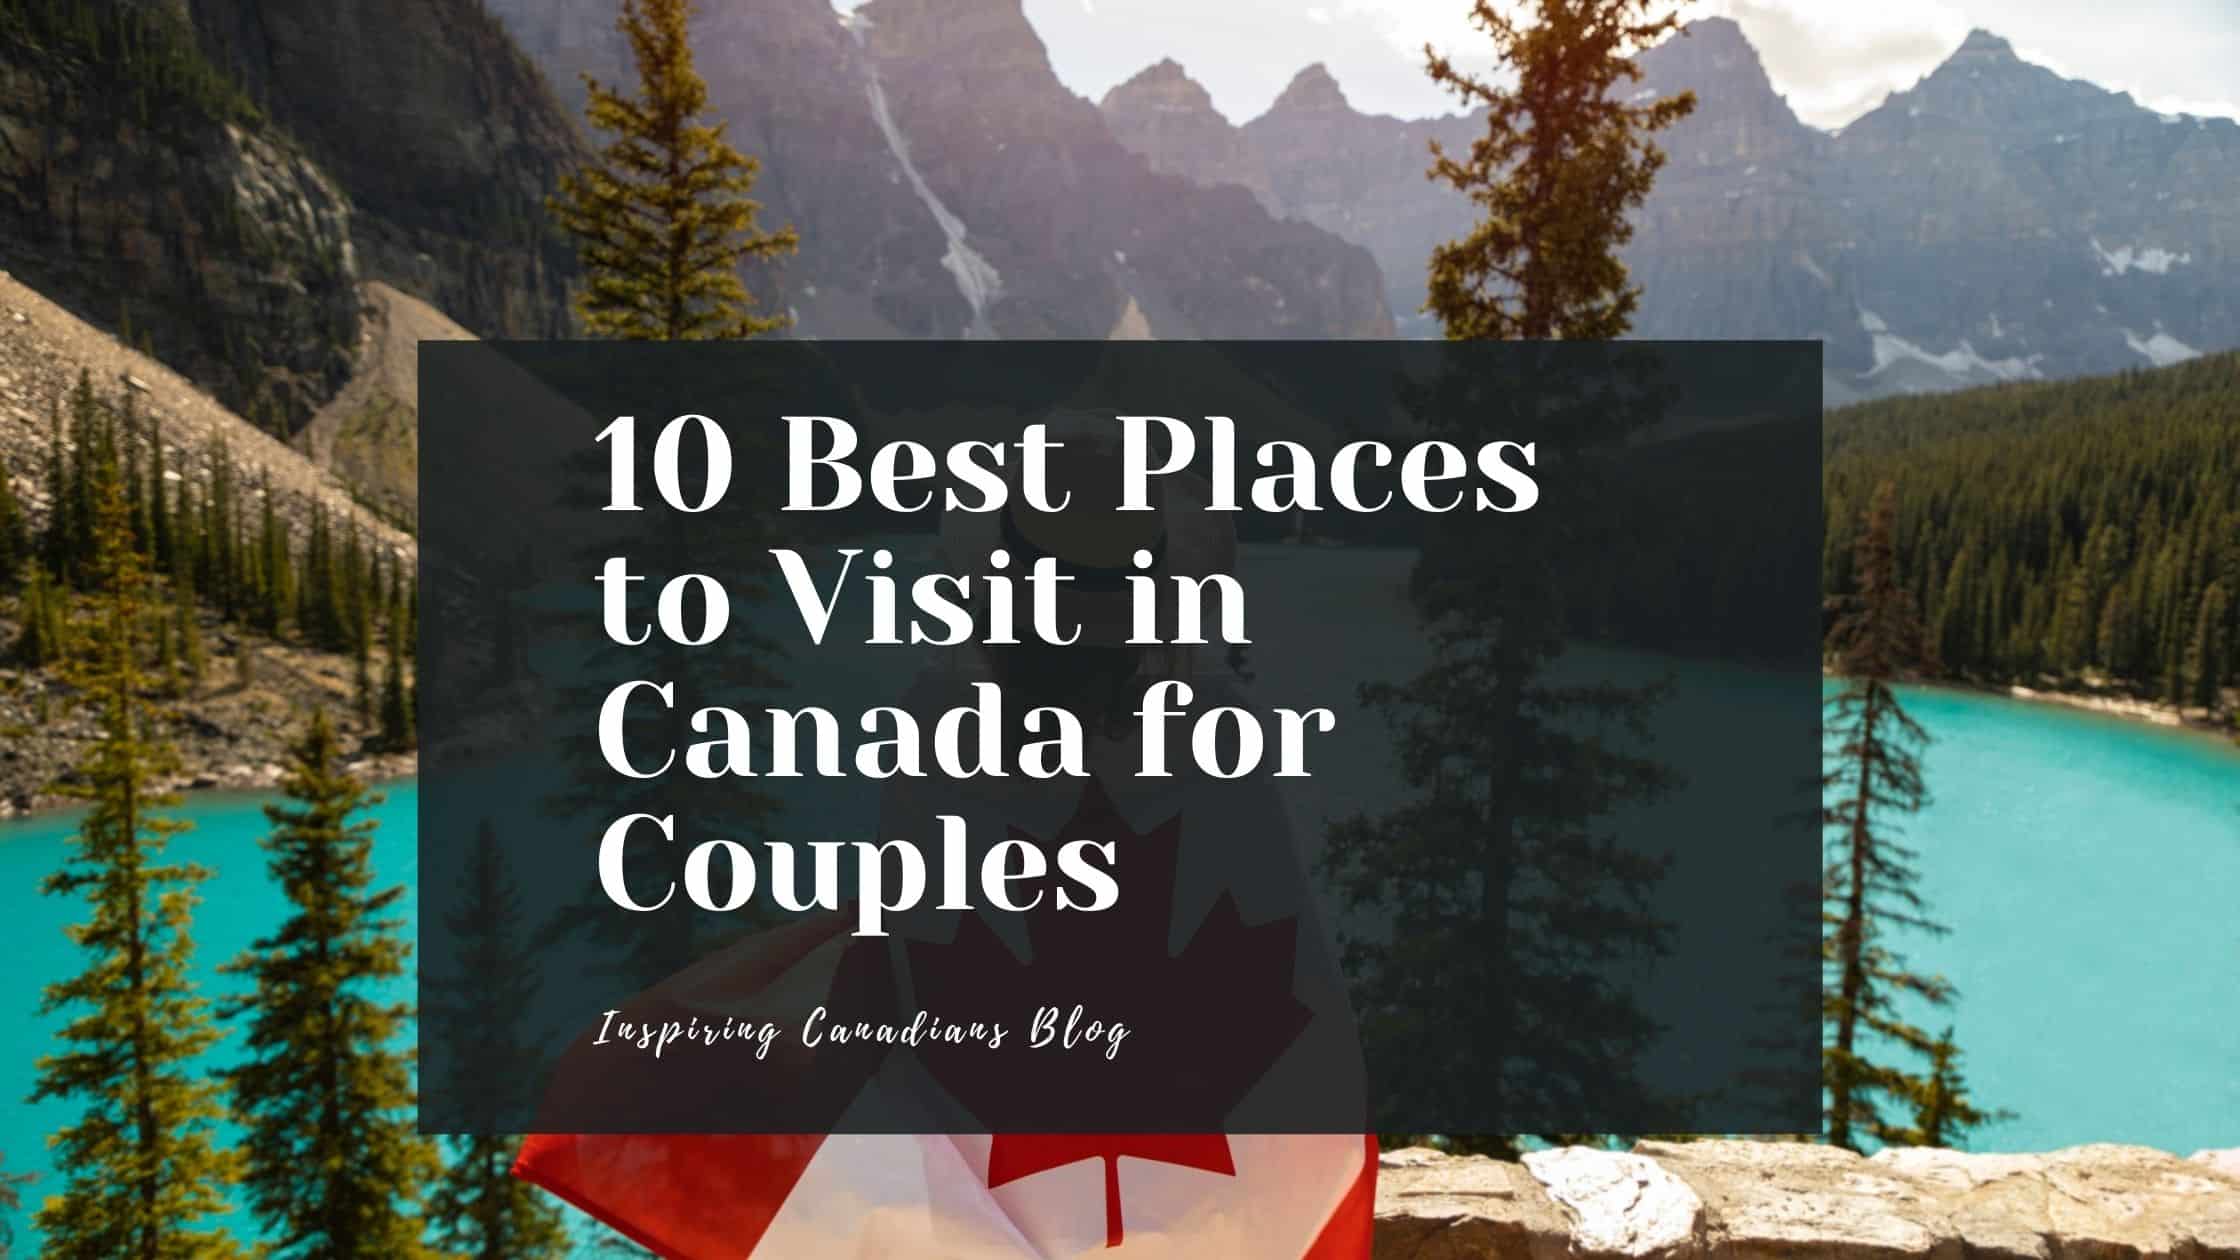 10 Best Places to Visit in Canada for Couples